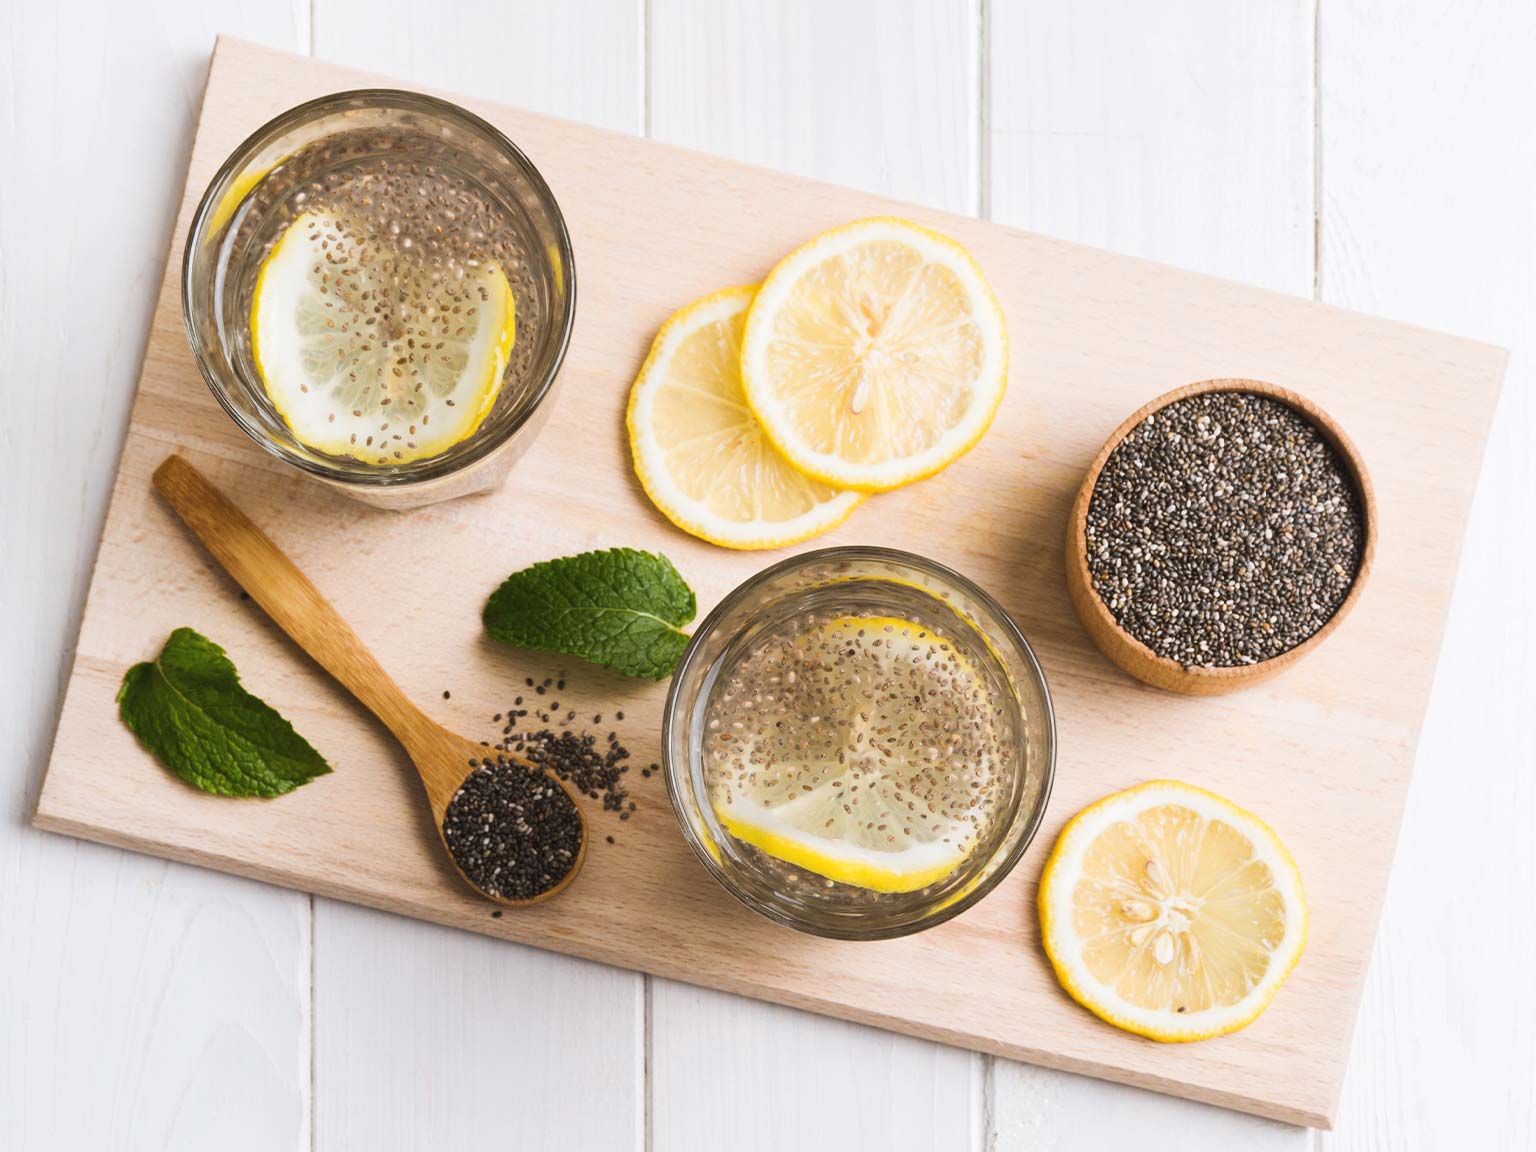 two glasses filled with water and lemon, a wooden spoon with chia seeds and a bowl filled with chia seeds